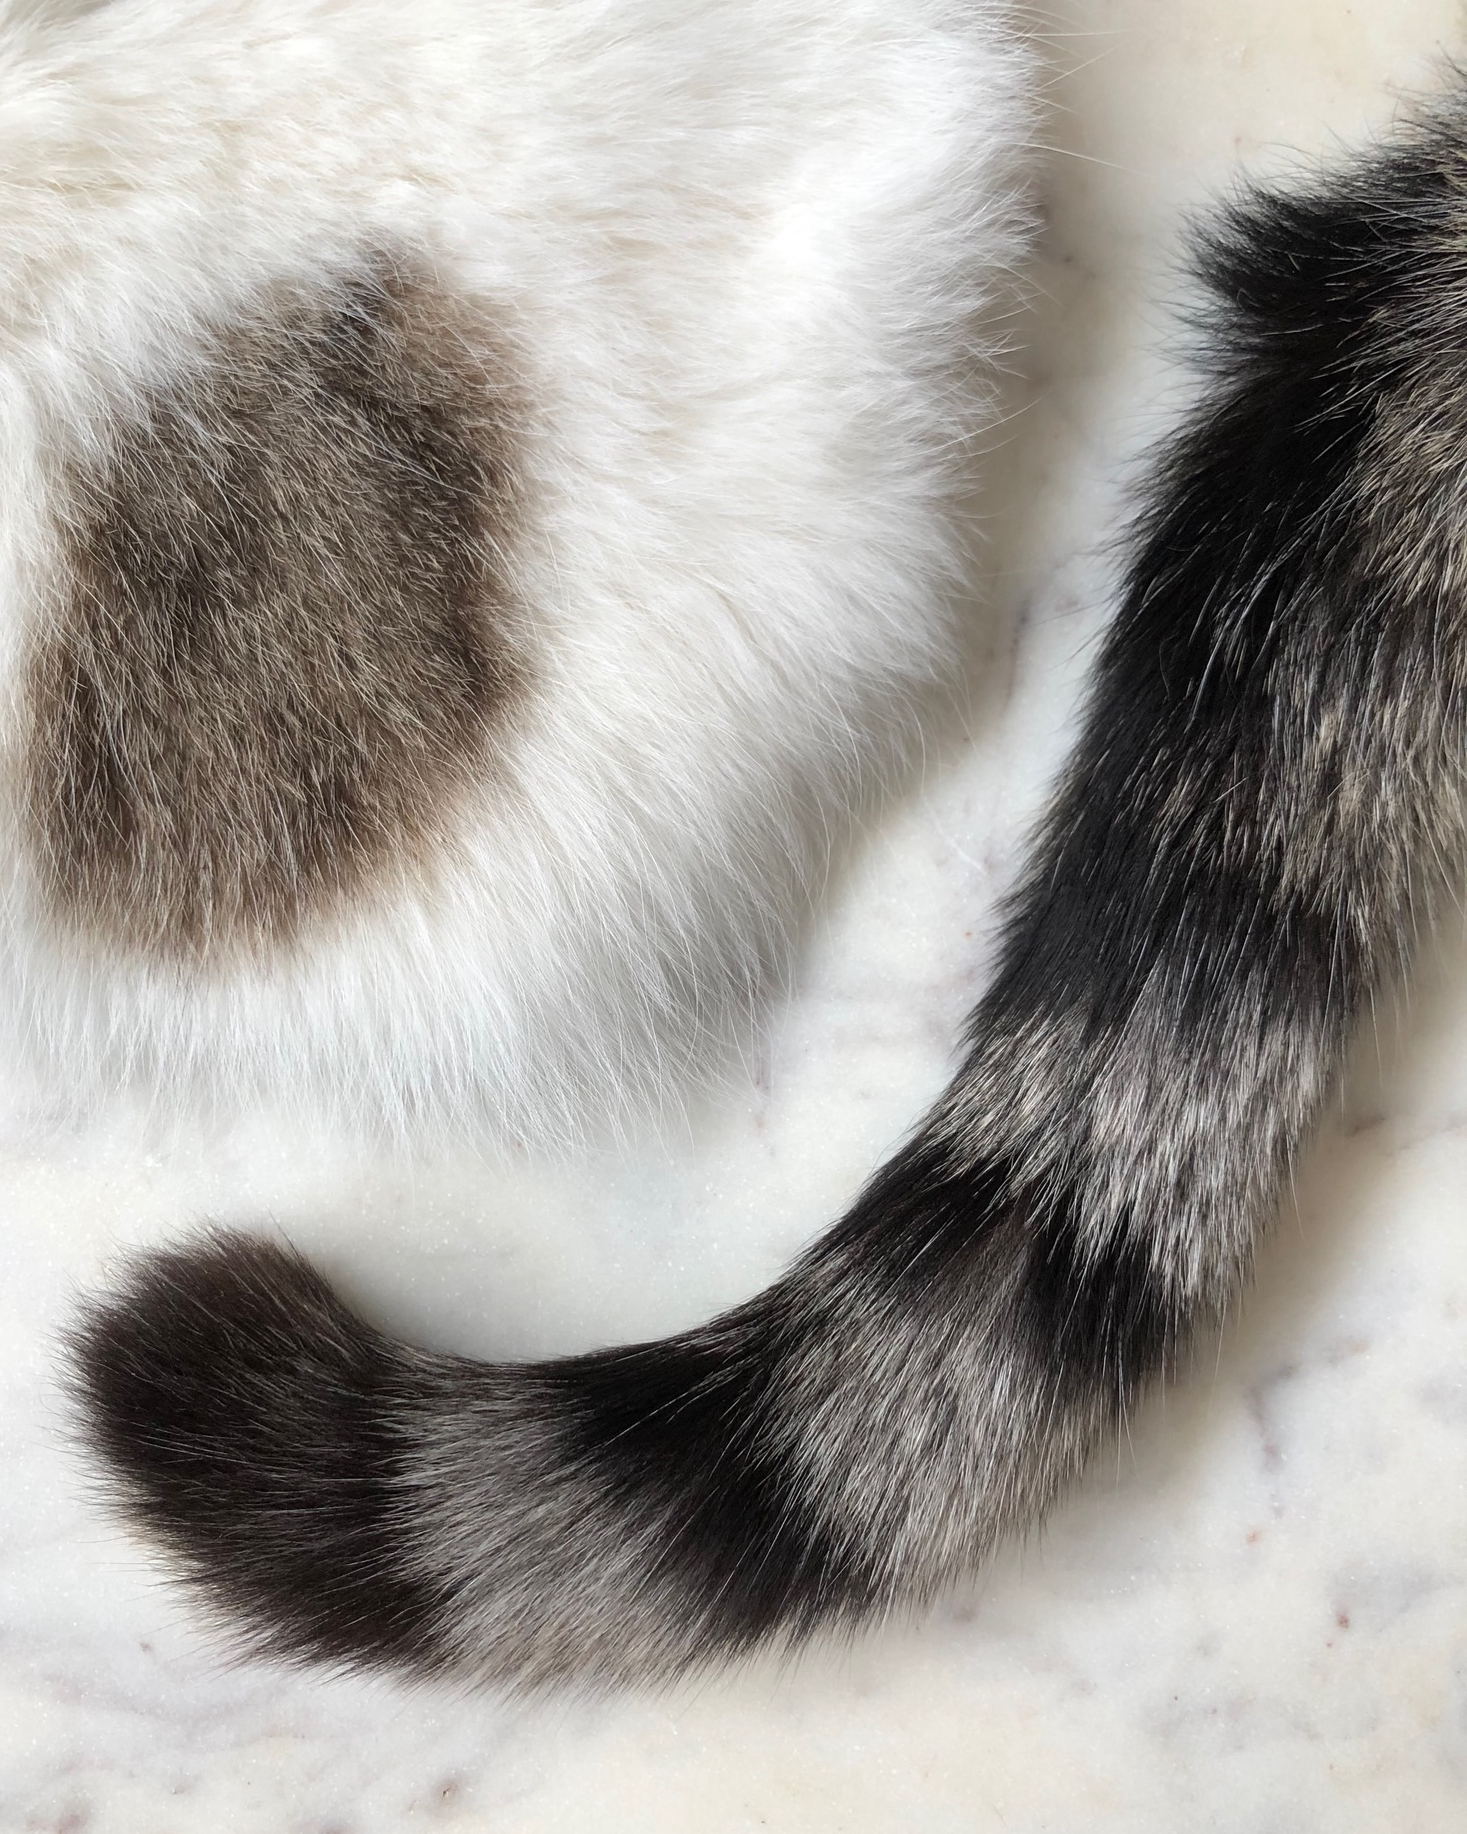 Preserved cat's tail looping next to a preserved fur patch